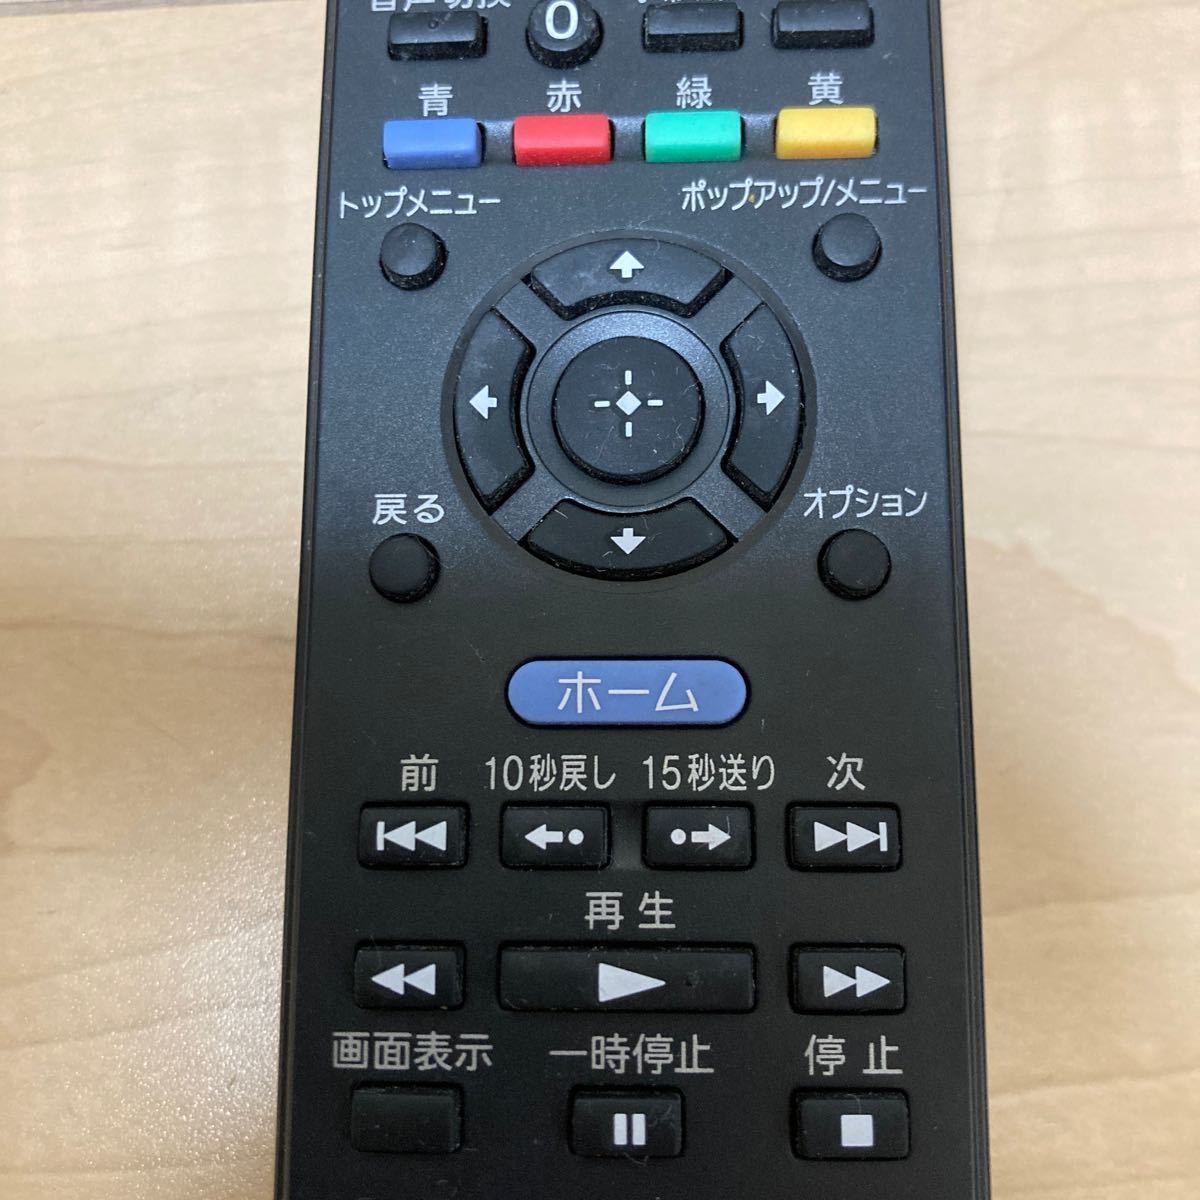  Sony SONY remote control RMT-B107J BD player BDP-S470 for BD deck BDP-S370 etc. Blue-ray player 